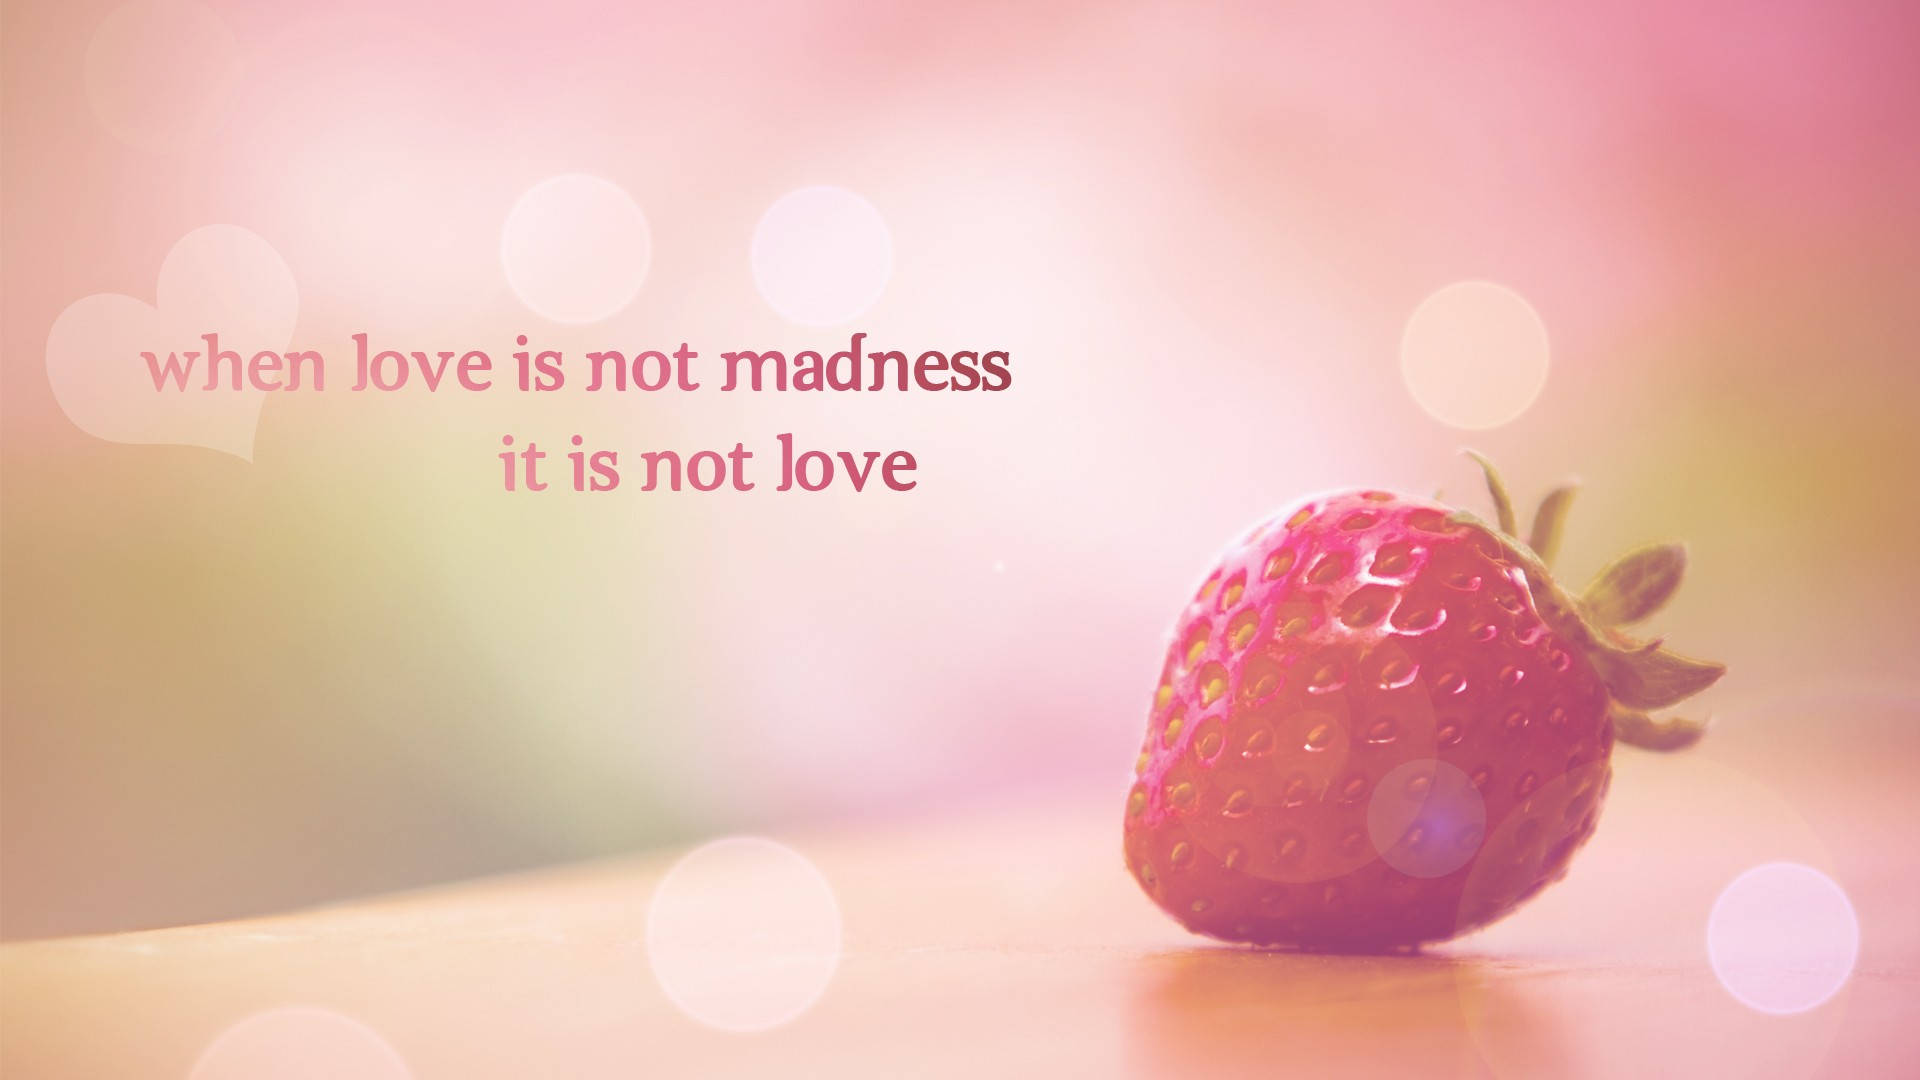 Free Love Quotes Wallpaper Downloads, [200+] Love Quotes Wallpapers for  FREE 